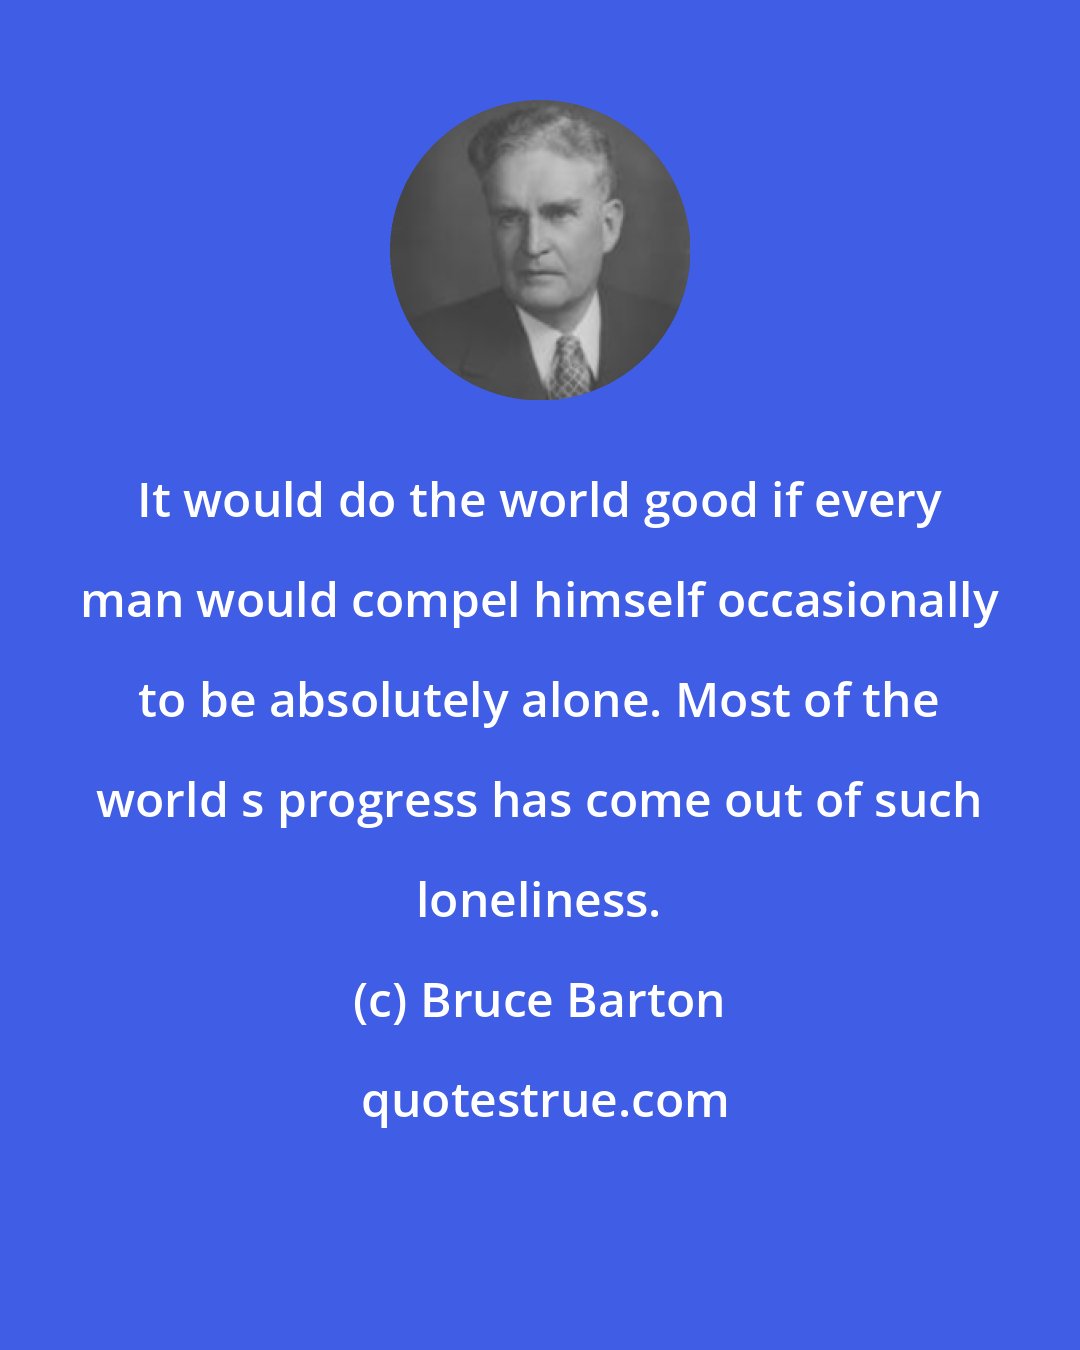 Bruce Barton: It would do the world good if every man would compel himself occasionally to be absolutely alone. Most of the world s progress has come out of such loneliness.